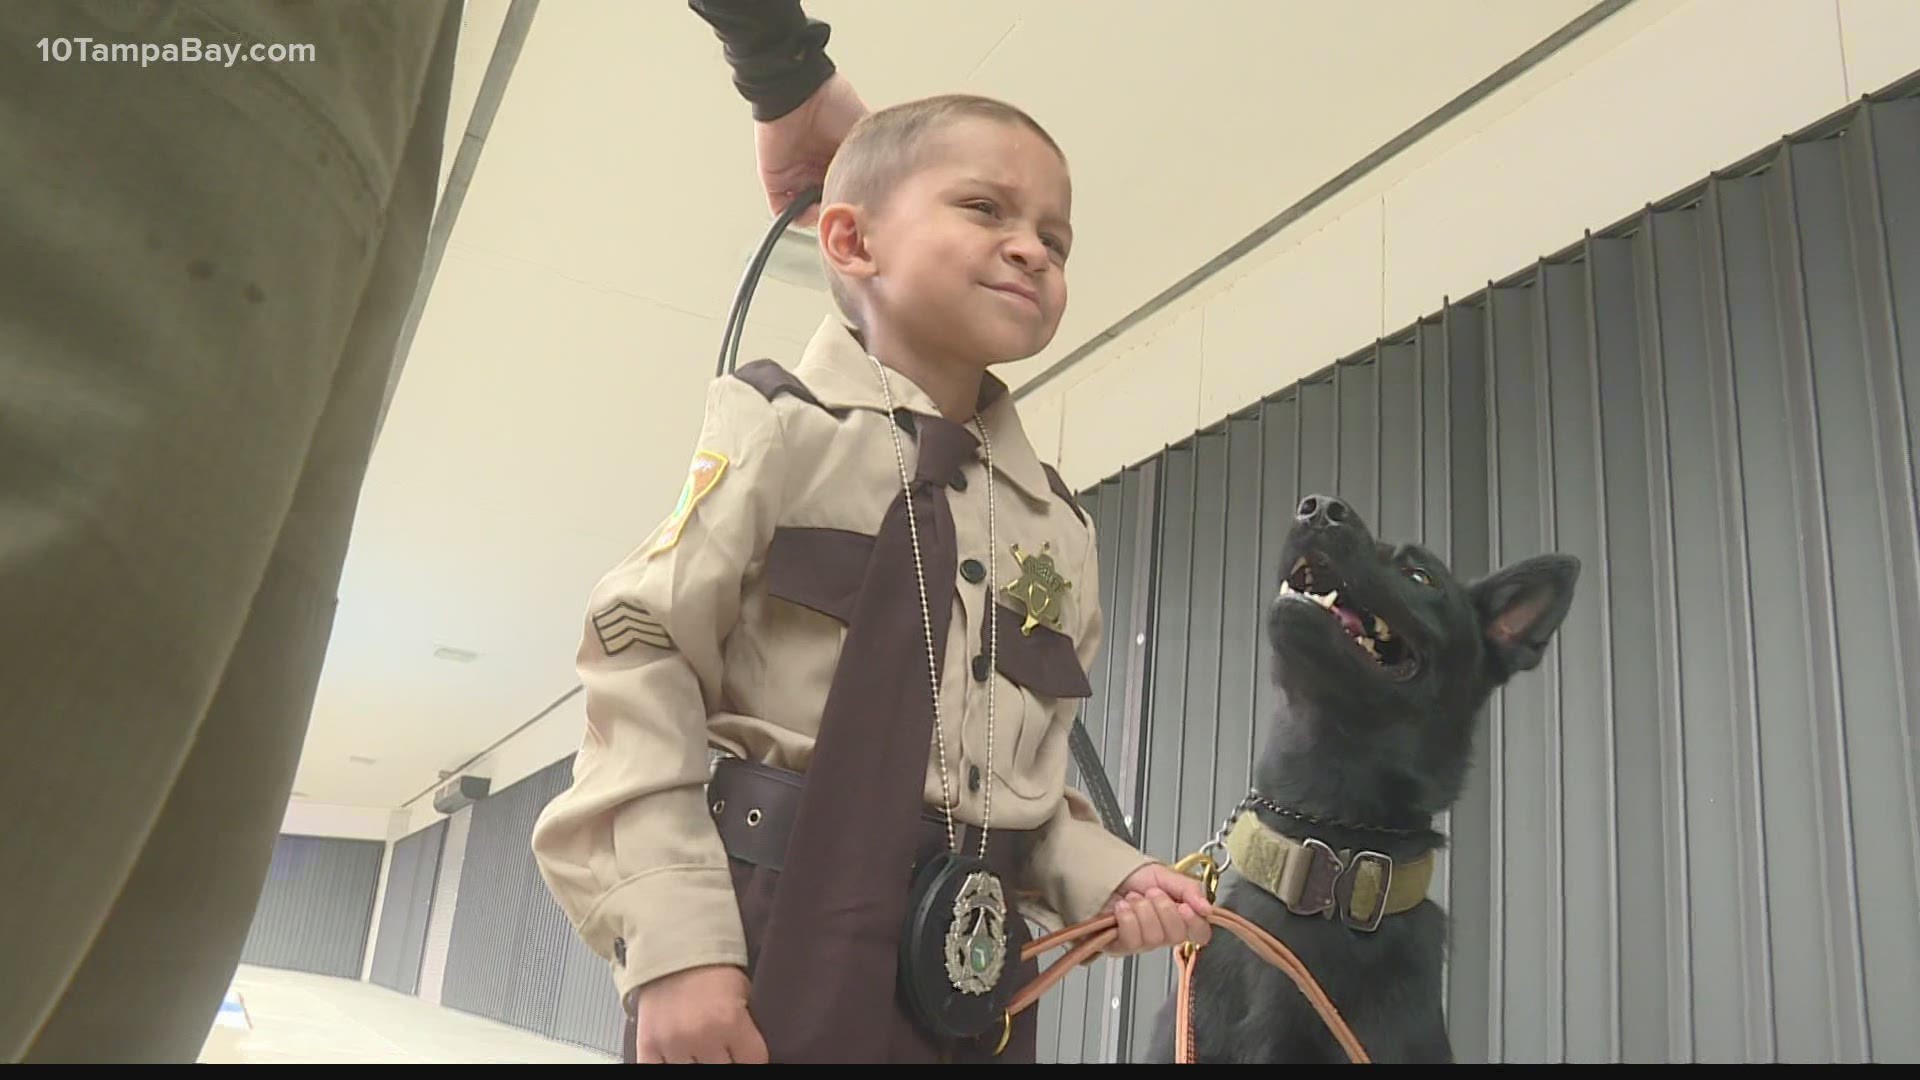 5-year-old Jeremiah got a badge, K-9 training and some new Manatee County deputy friends to help him finish off his cancer treatments strong.